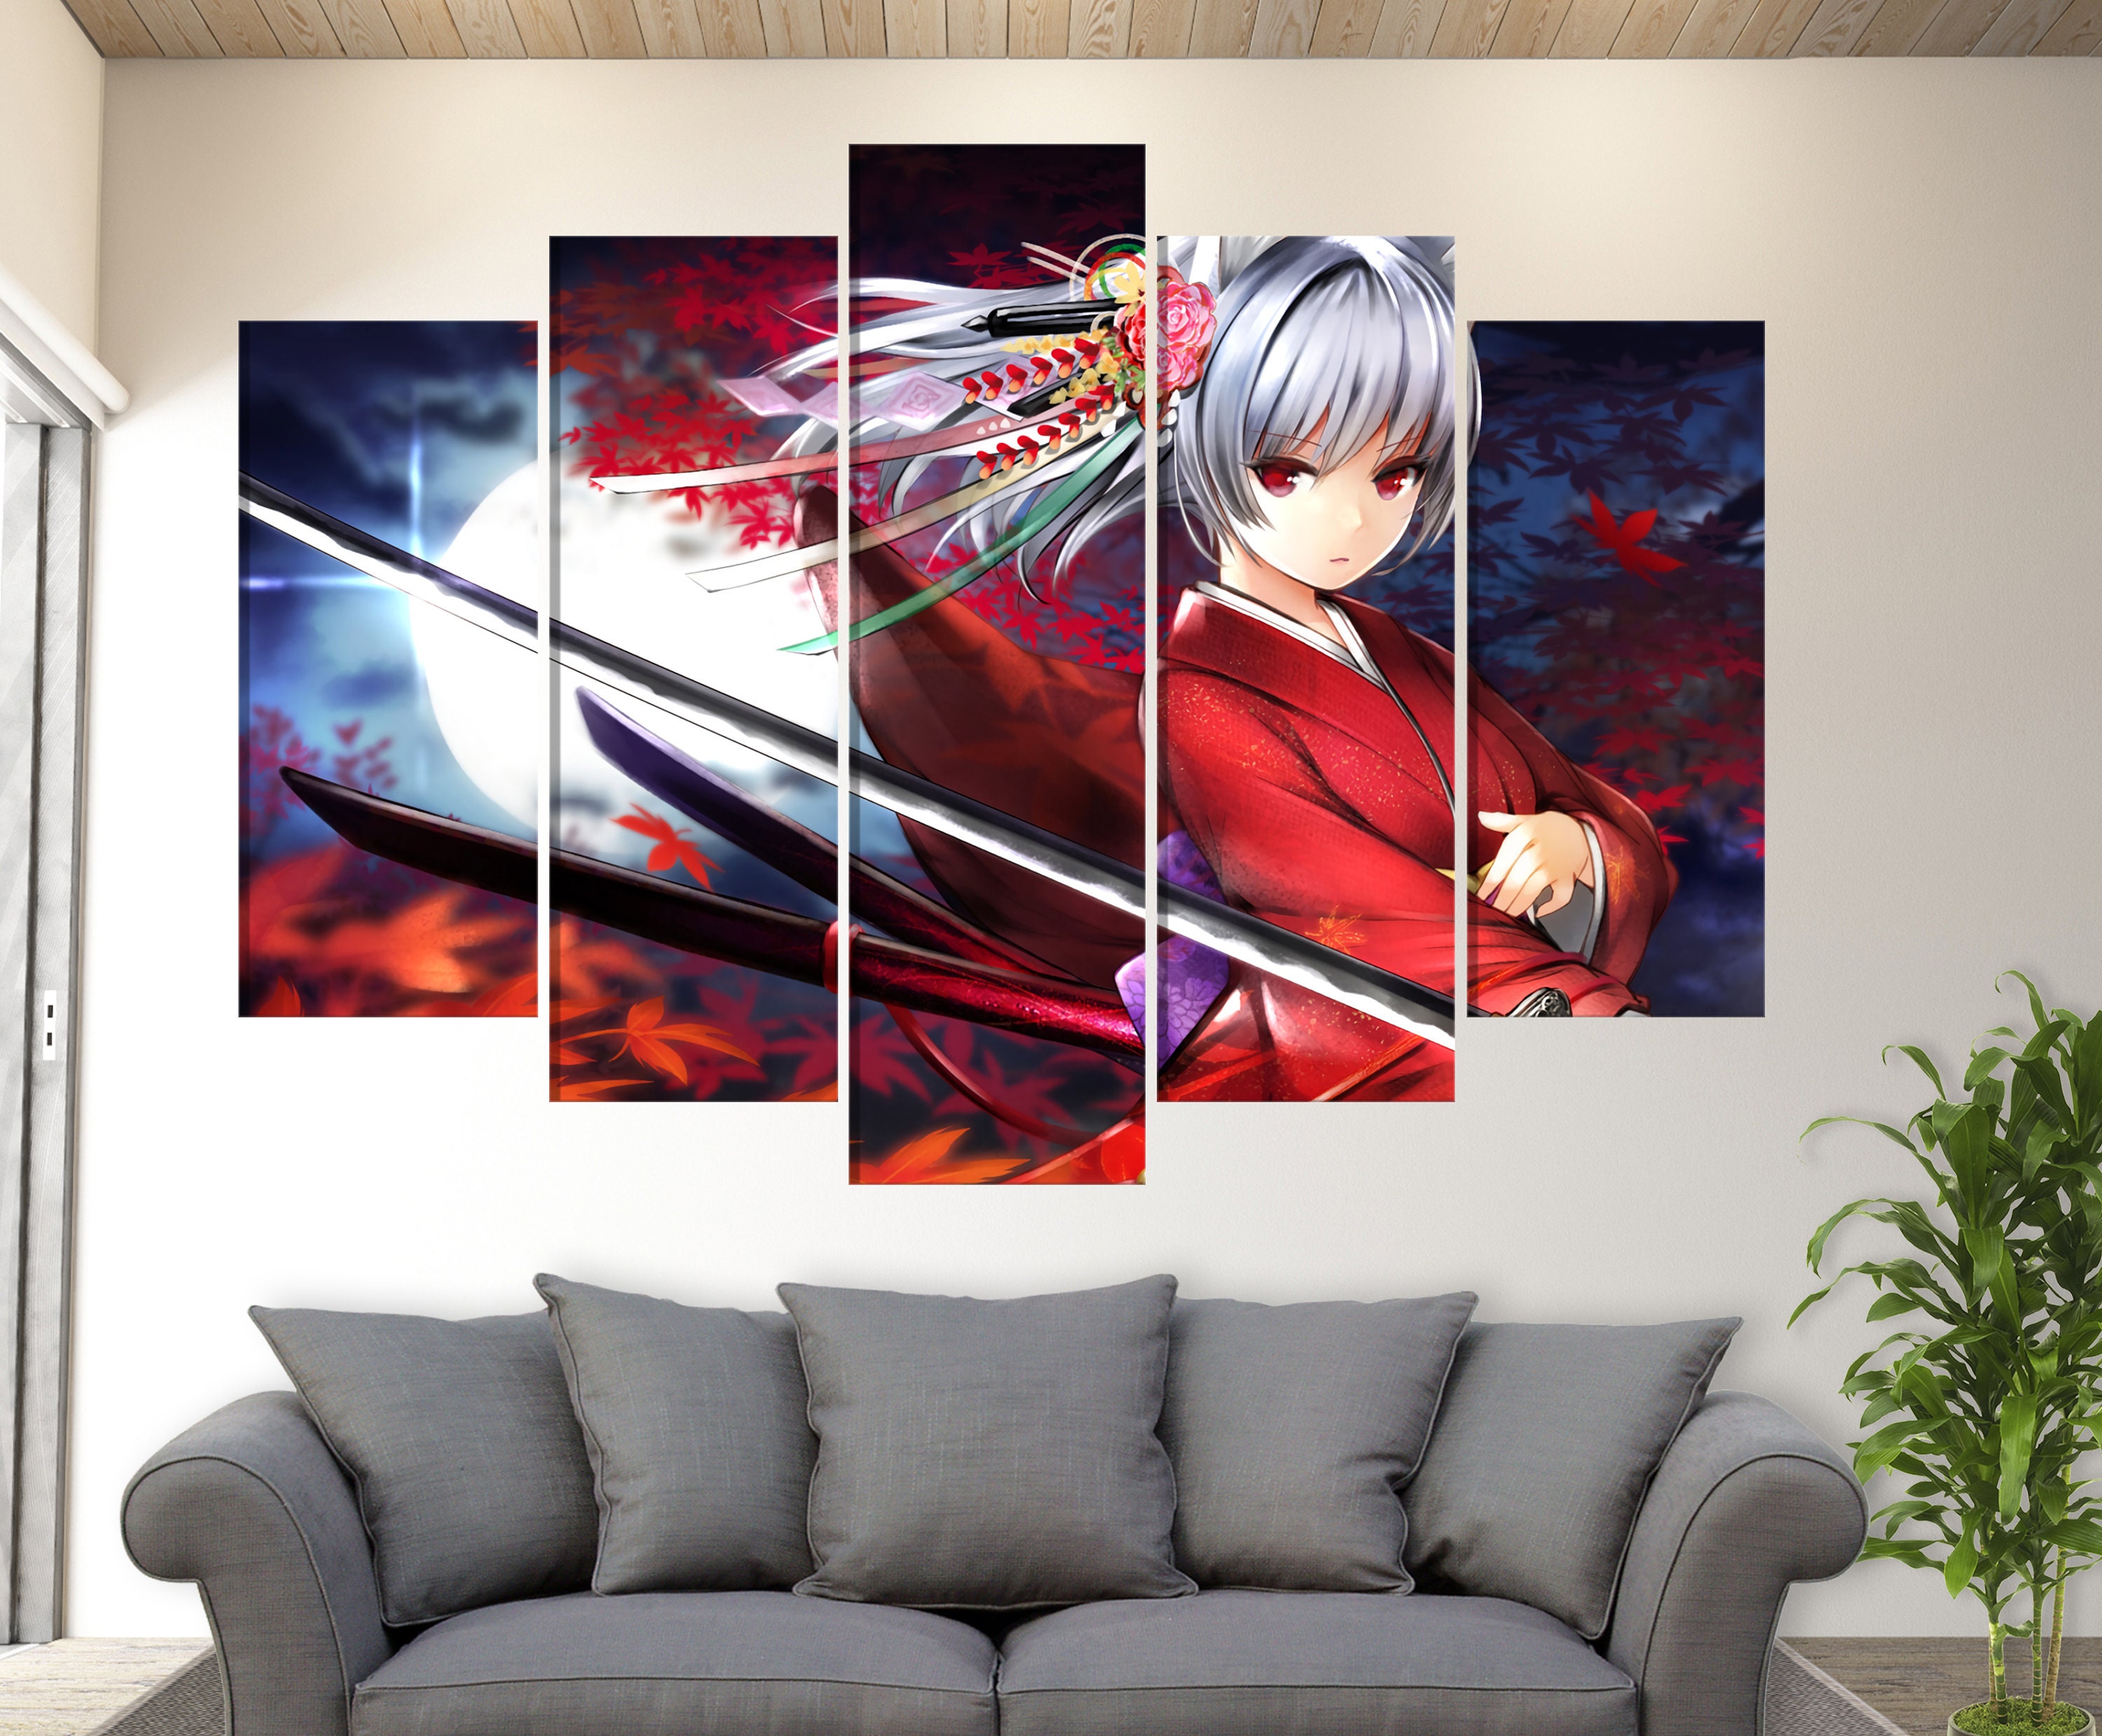 Wall Art Home Decorative Canvas HD Print Painting 5 Panel Anime OnePiece  Roles Poster For Living Room Or Bedroom Modern Artwork  Lazada PH